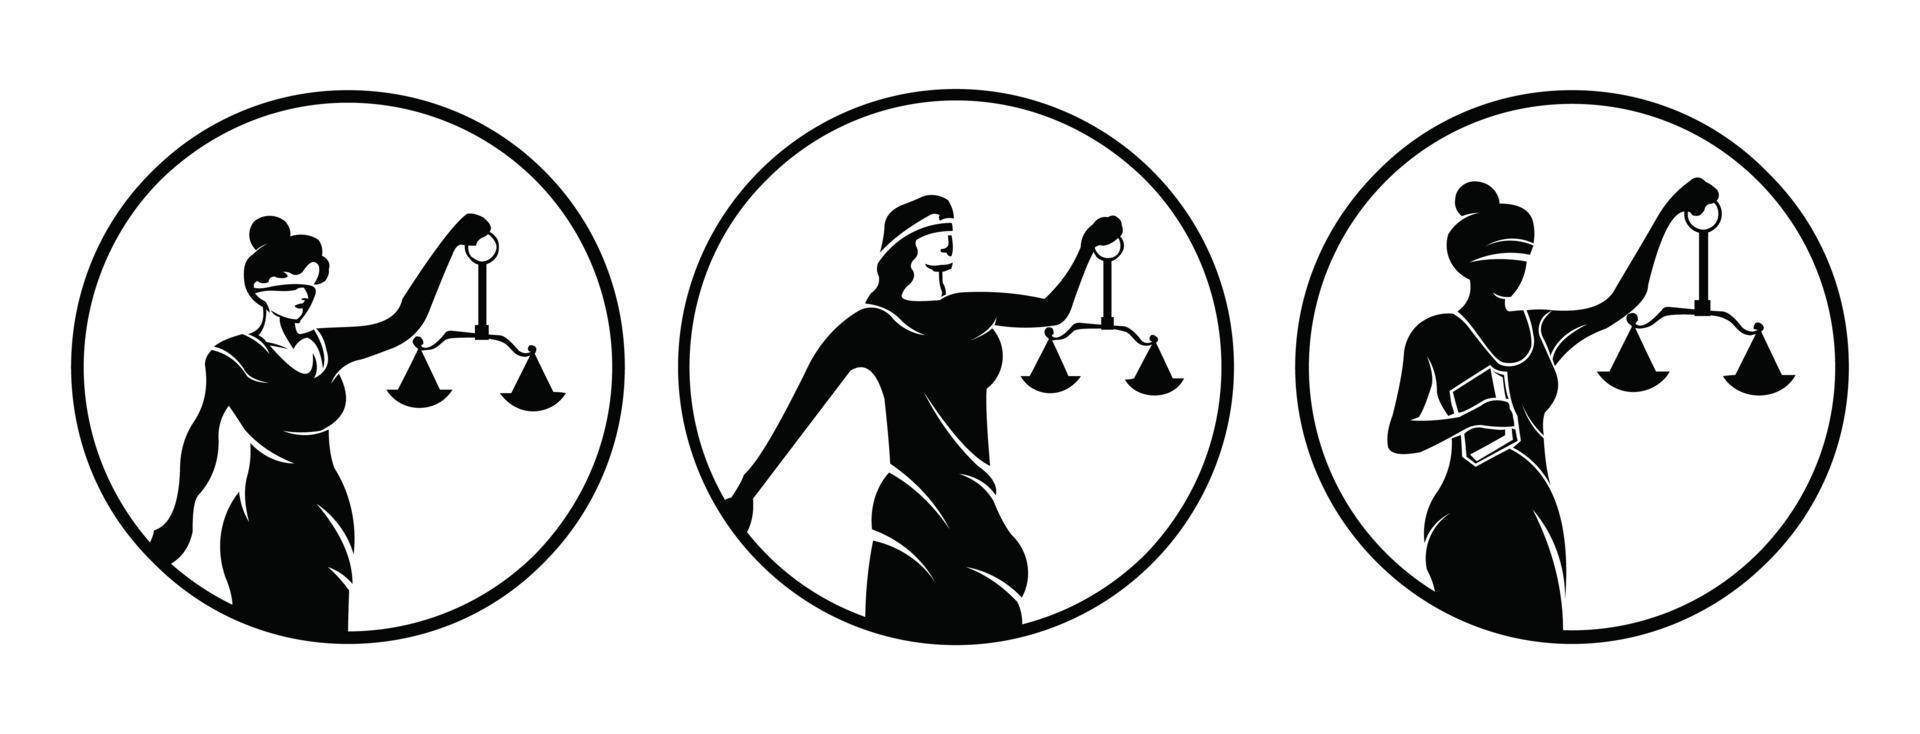 Themis logo of justice and law, Blindfold woman with scales. vector